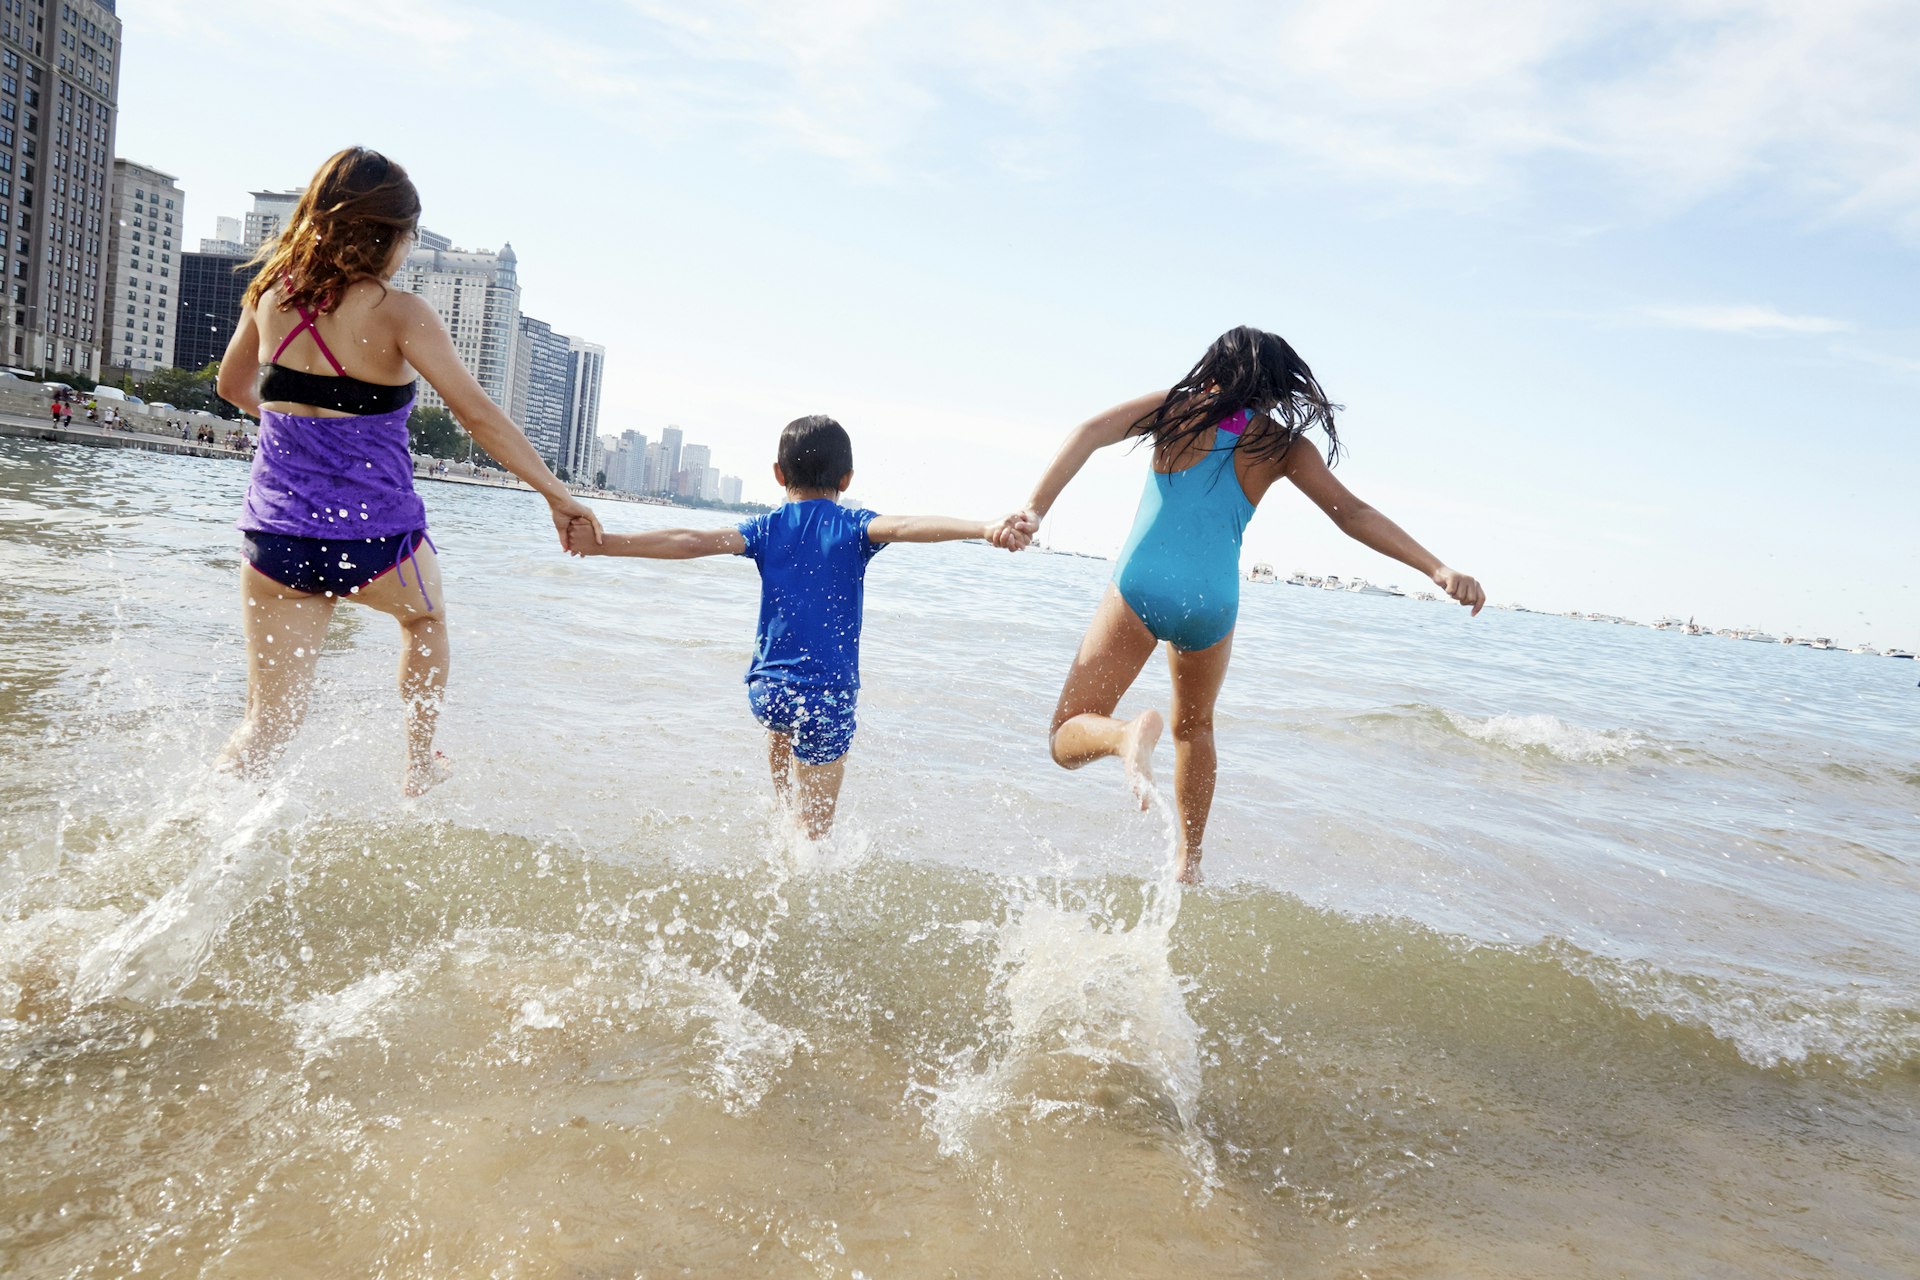 Three children hold hands as they run into the water of Lake Michigan with towers in the distance at a city beach in Chicago, Illinois, Midwest, USA